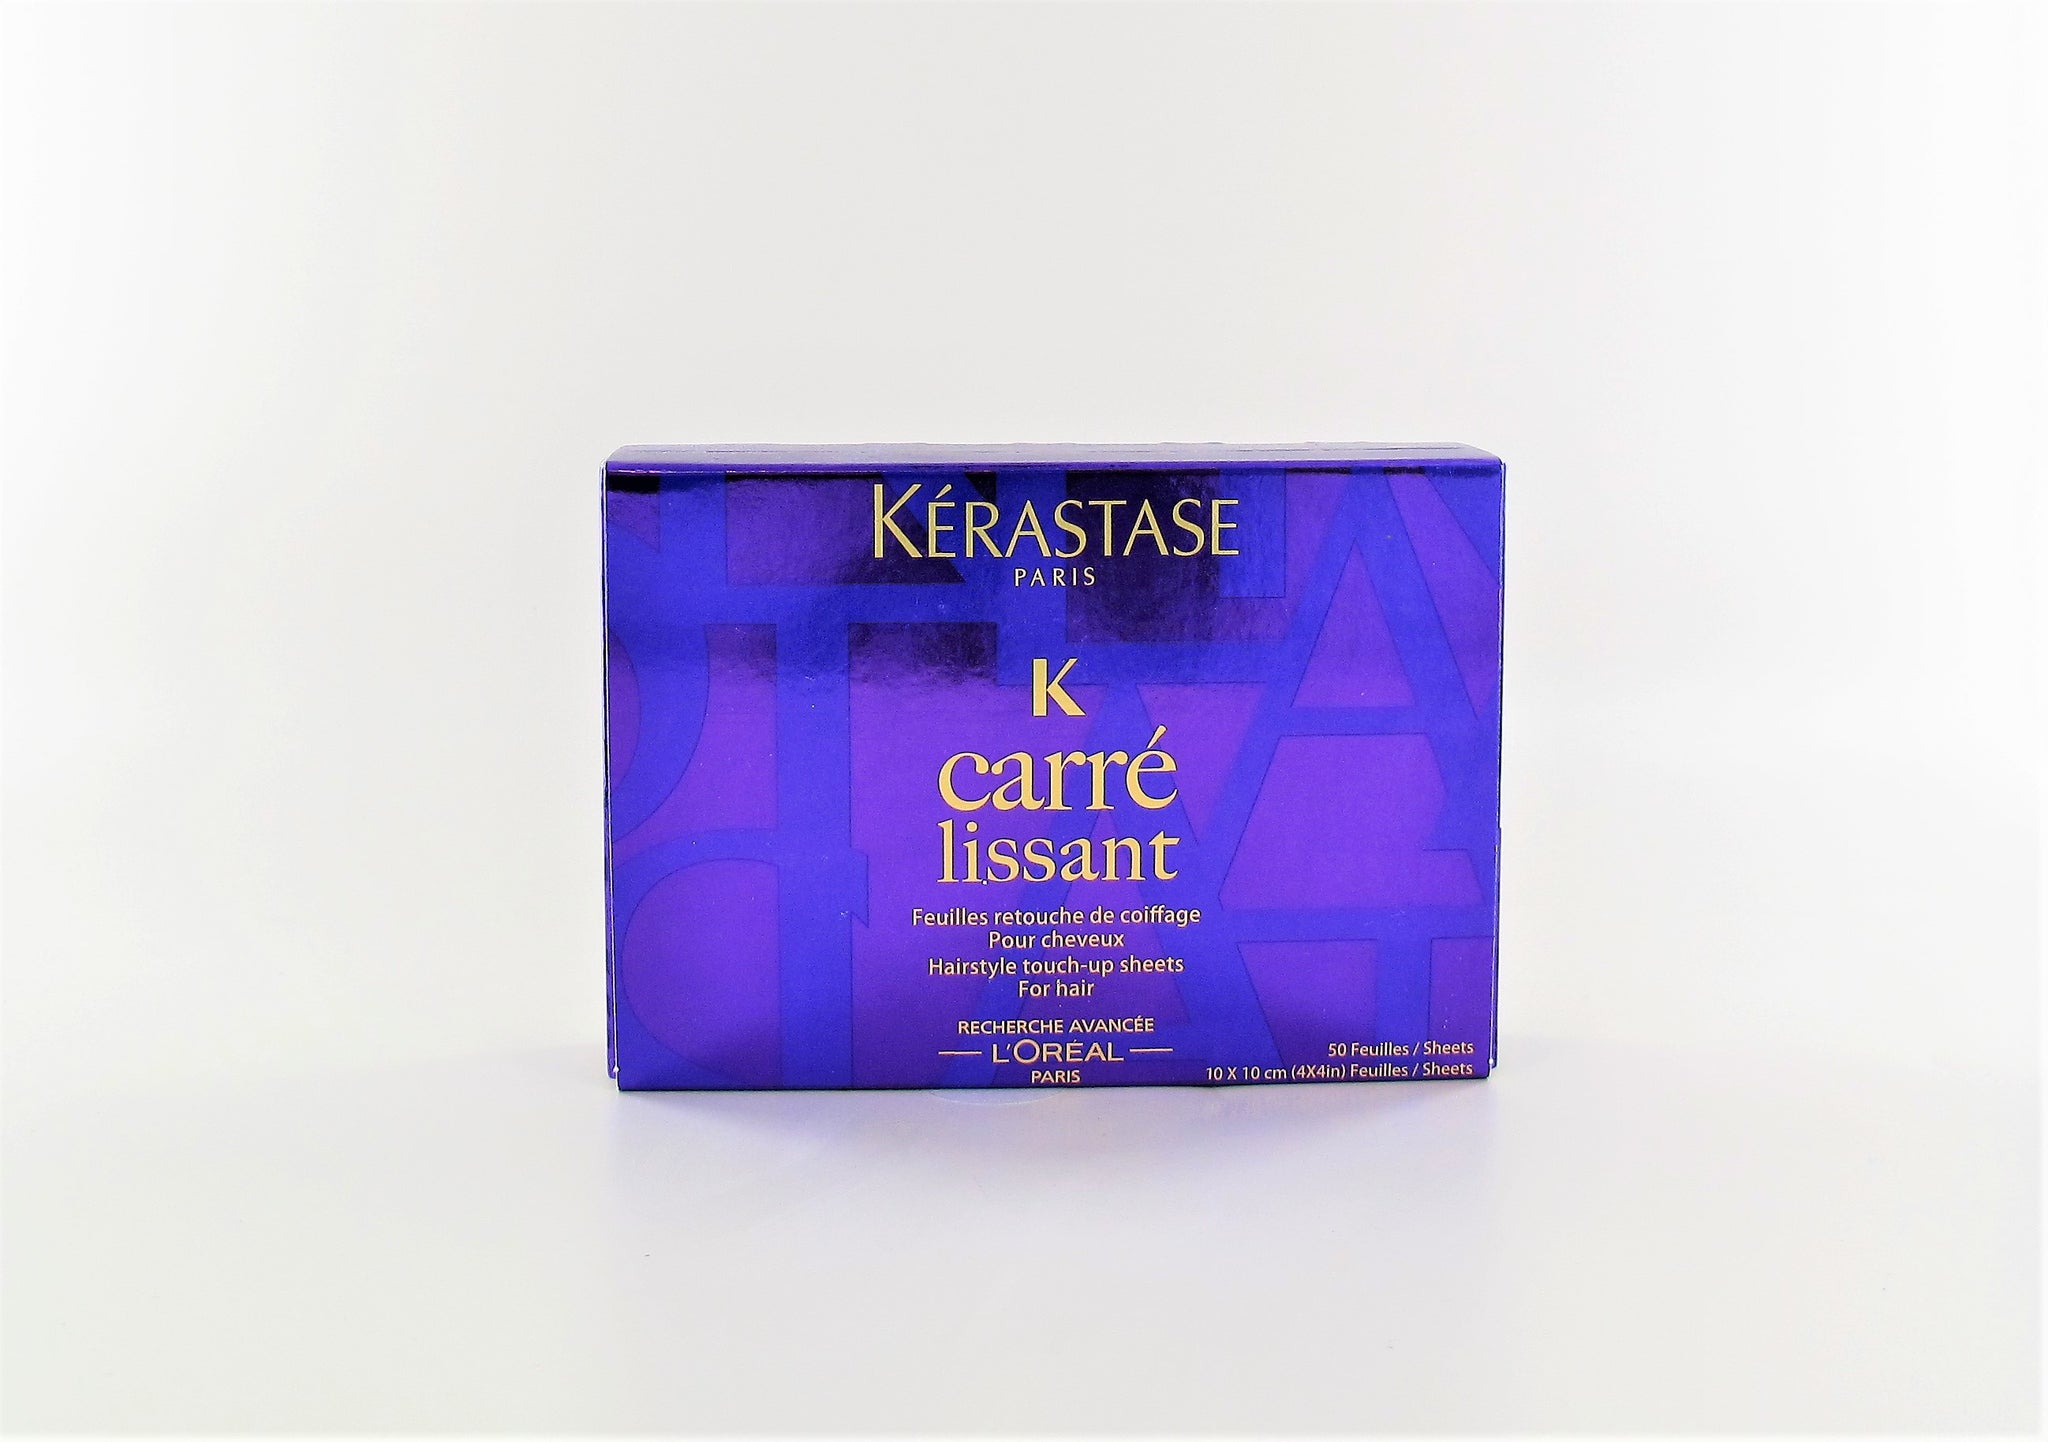 KERASTASE Carre Lissant Hairstyle Touch Up Sheets 50 Sheets